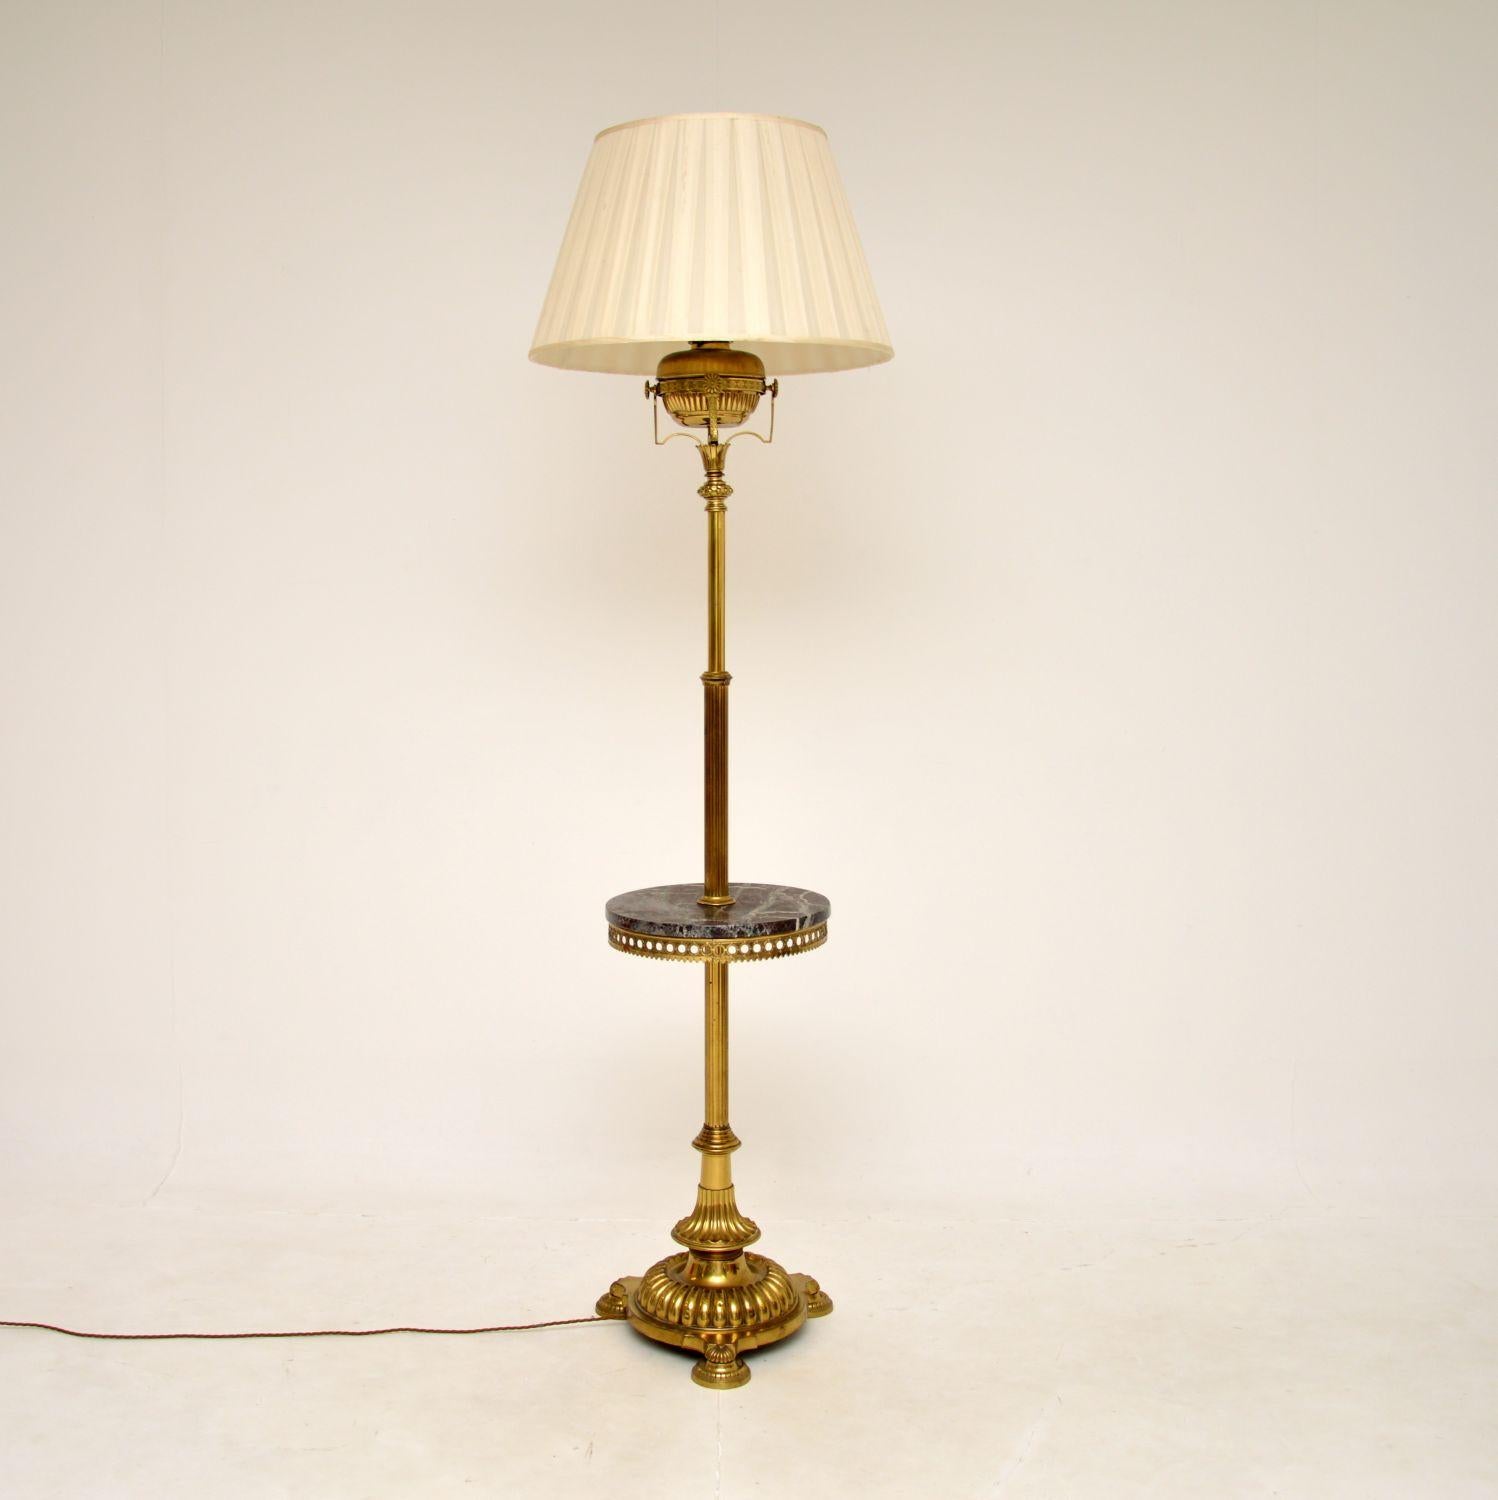 An exceptional antique French brass and marble floor lamp, dating from around the 1910-20’s.

This is of outstanding quality, with incredibly fine and intricate details to the brass work. It is is a great size, it is very heavy and has a gorgeous